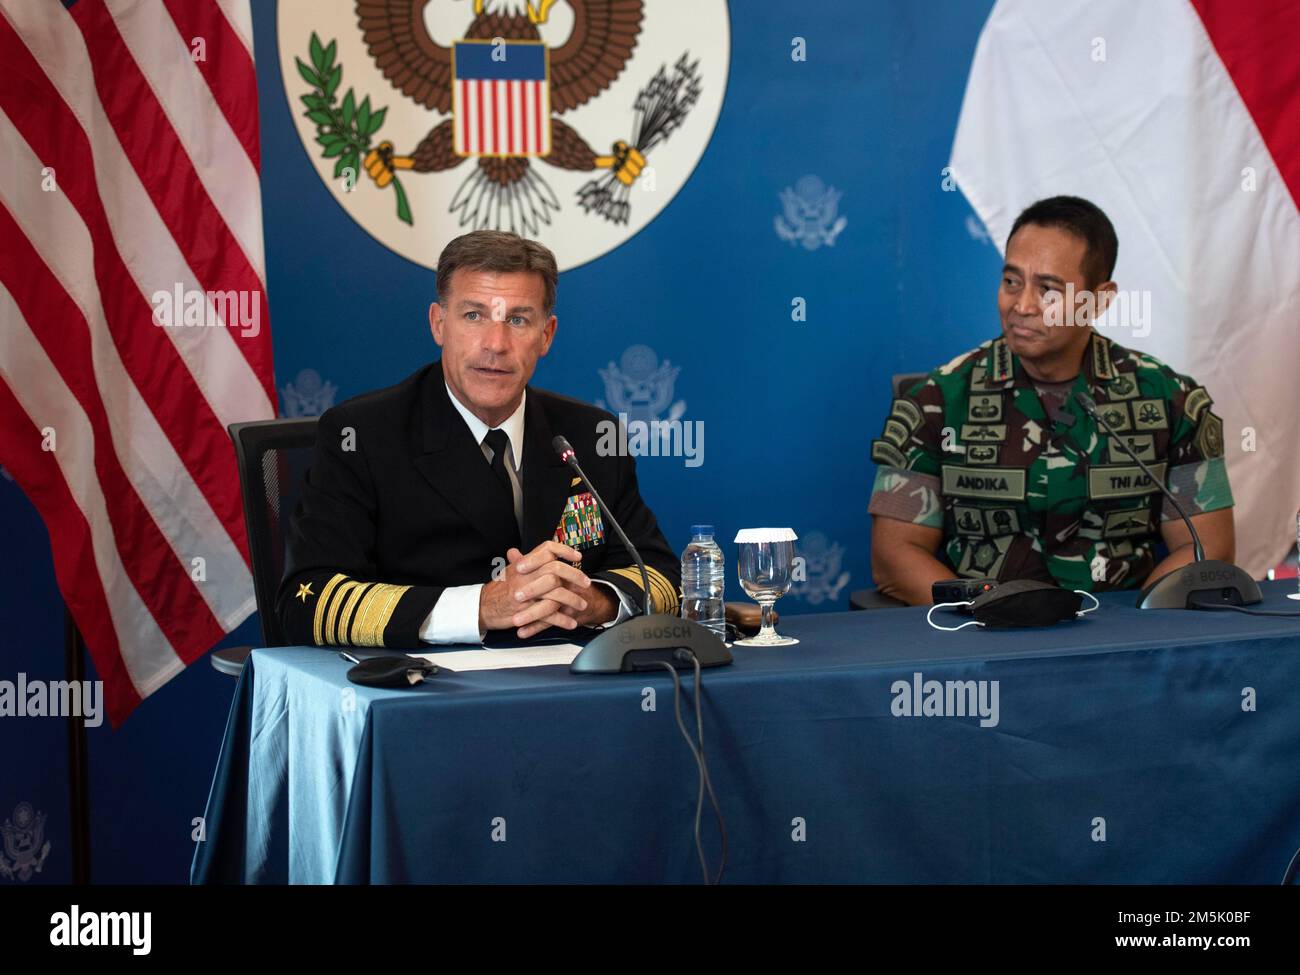 JAKARTA (March 21, 2022)  Commander, U.S. Indo-Pacific Command Adm. John C. Aquilino and Indonesia Commander of the National Armed Forces General Andika Perkasa take questions from media during a press conference.  Aquilino is in Indonesia meeting with regional leaders to strengthen the U.S. Indonesia relationship and reaffirm the importance of a free and open Indo-Pacific. Stock Photo